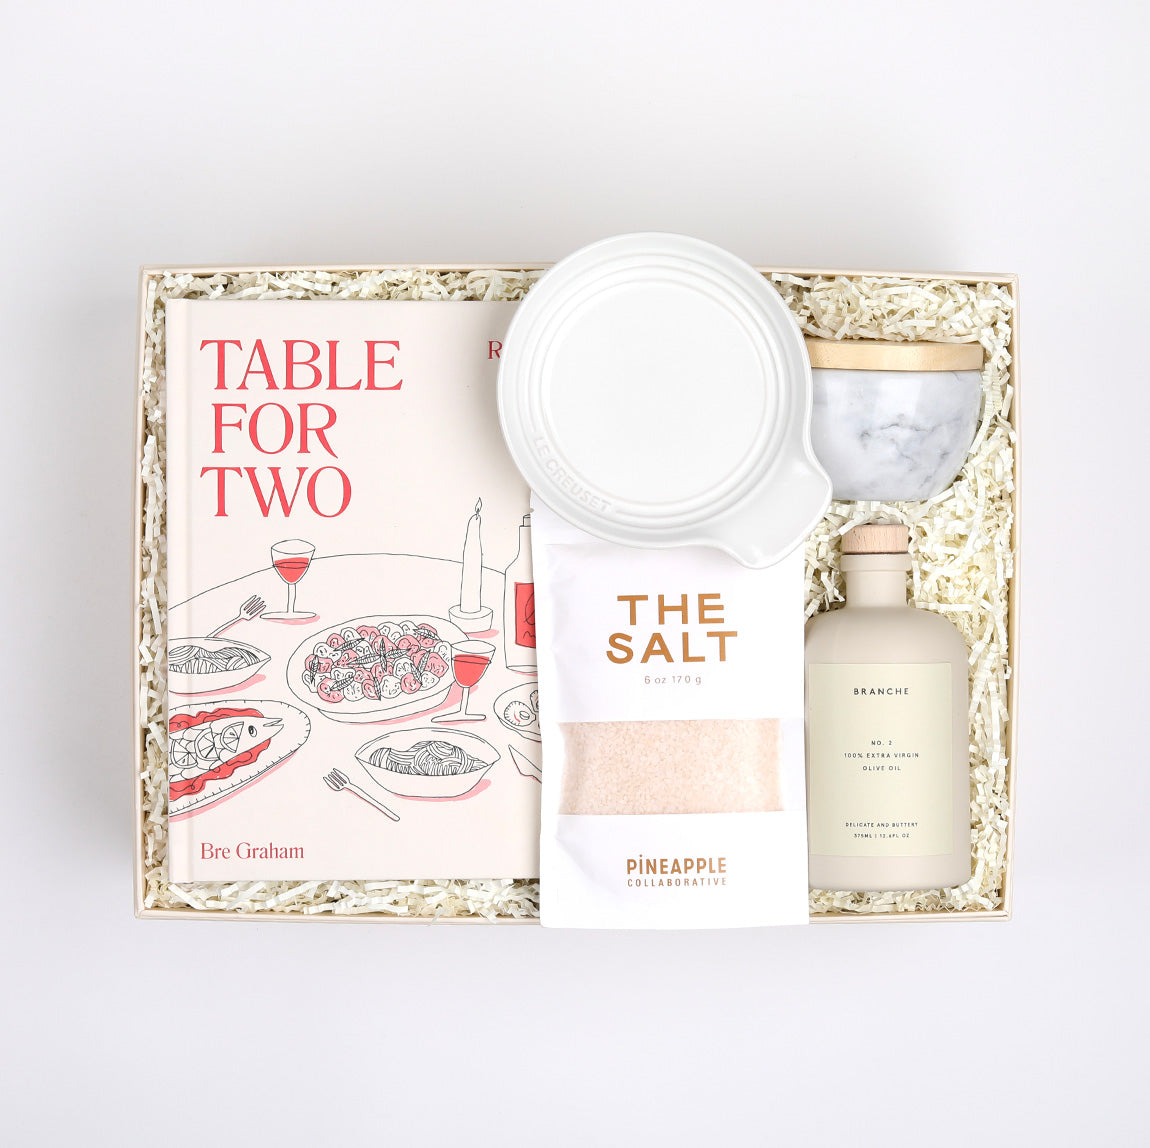 Table for Two ready to ship in creme featuring "Table for Two" cookbook, Le Creuset spoon rest, Branche olive oil, The Salt, and marble salt cellar